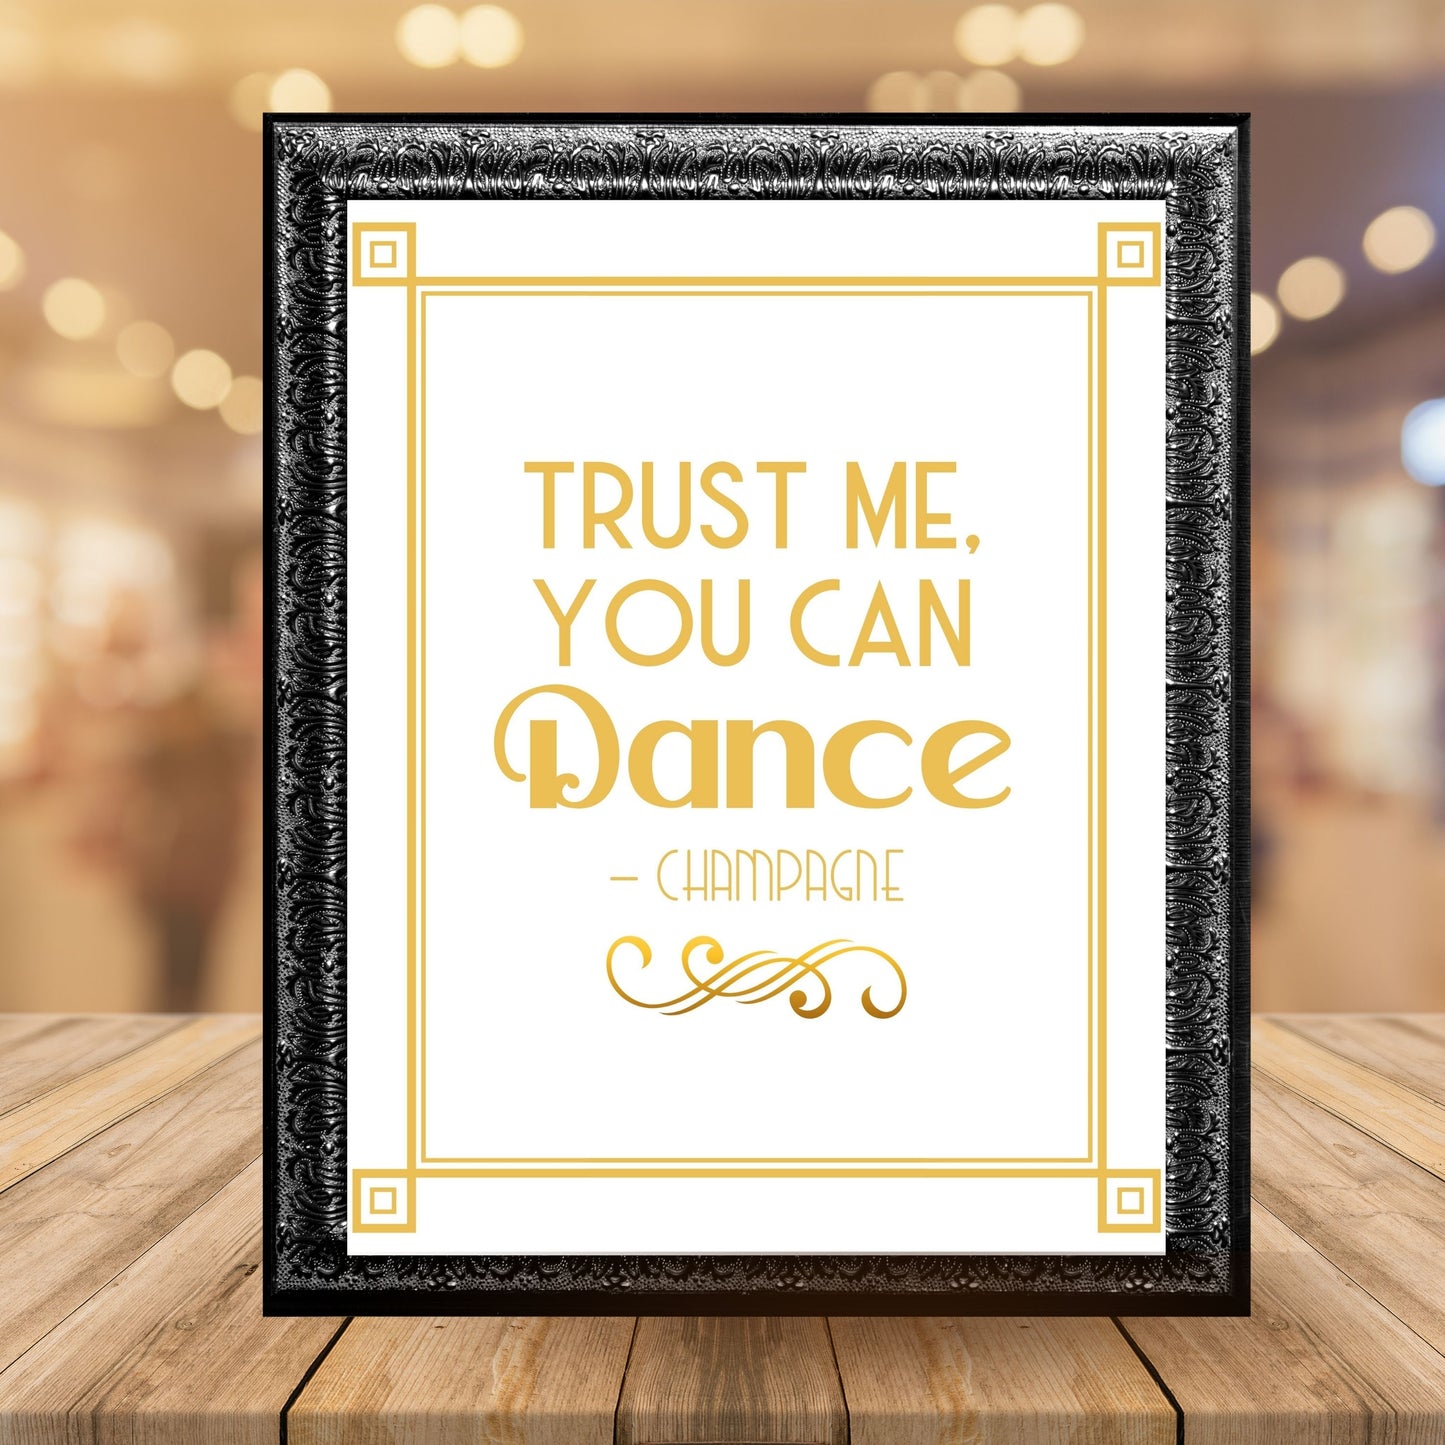 "Trust Me You Can Dance -Champagne" Printable Party Sign For Great Gatsby or Roaring 20's Party Or Wedding,  White & Gold, Printable Party Decor